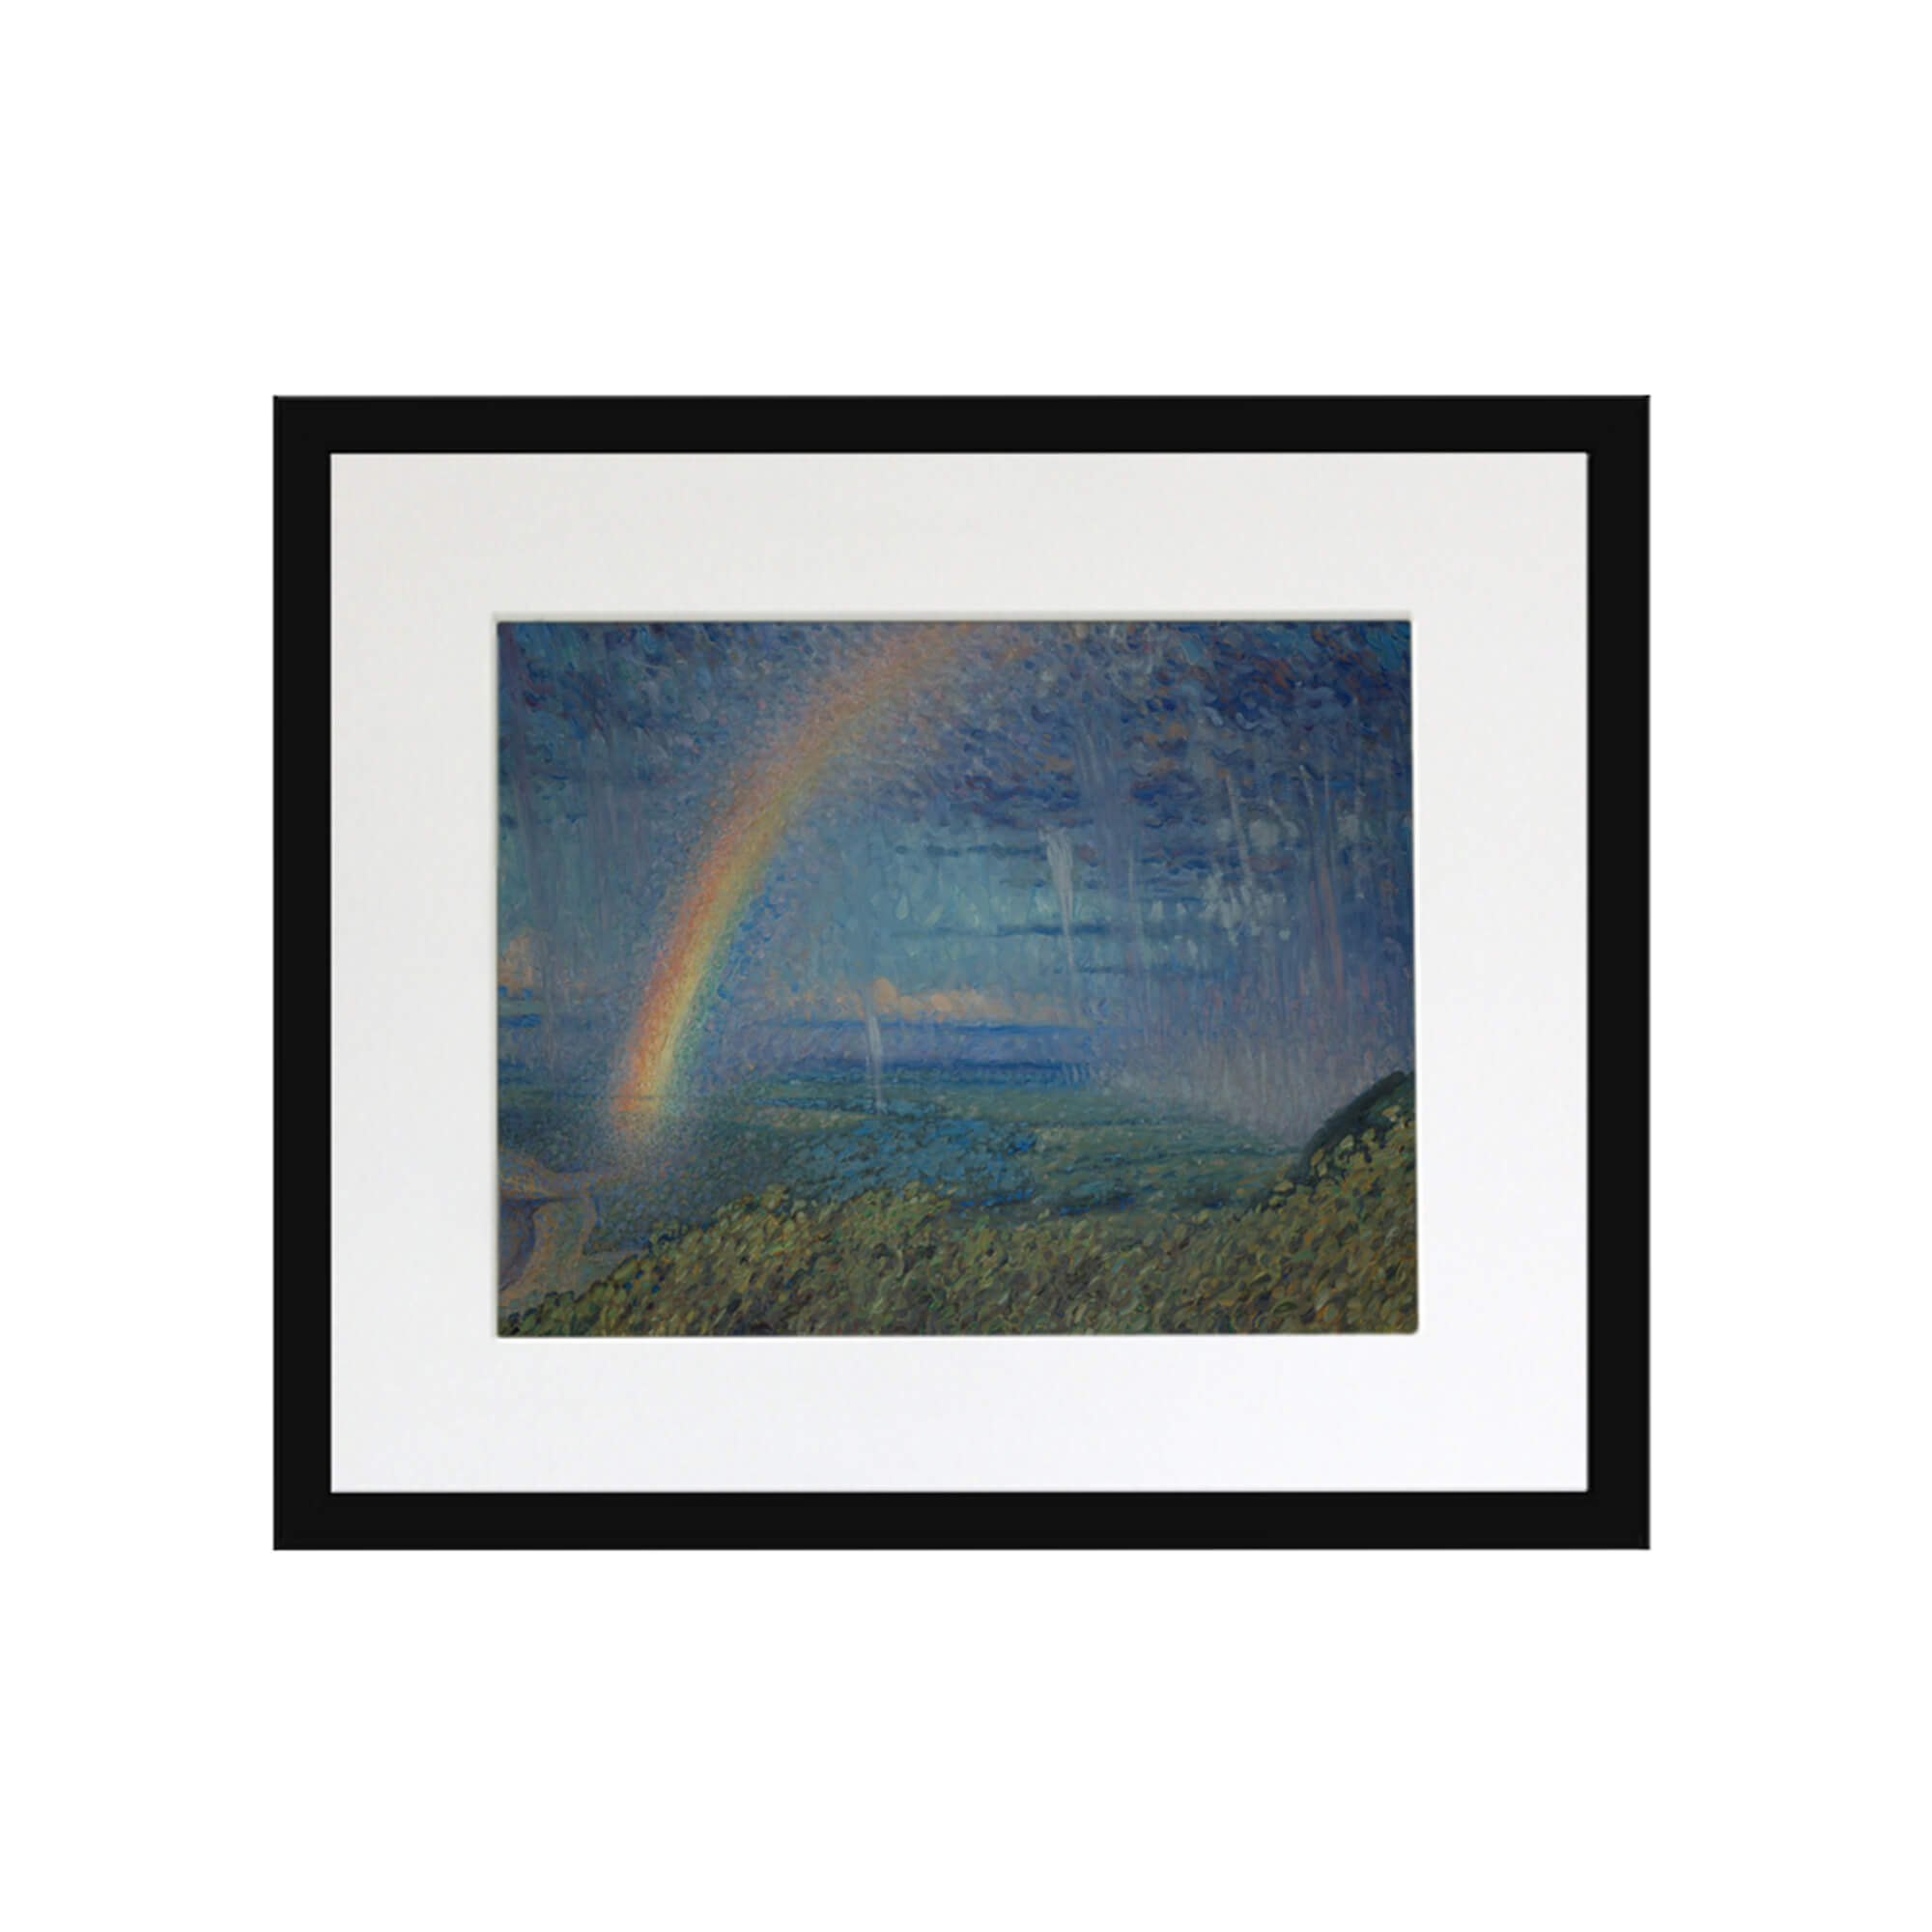 A vintage artwork featuring a rainbow and a landscape